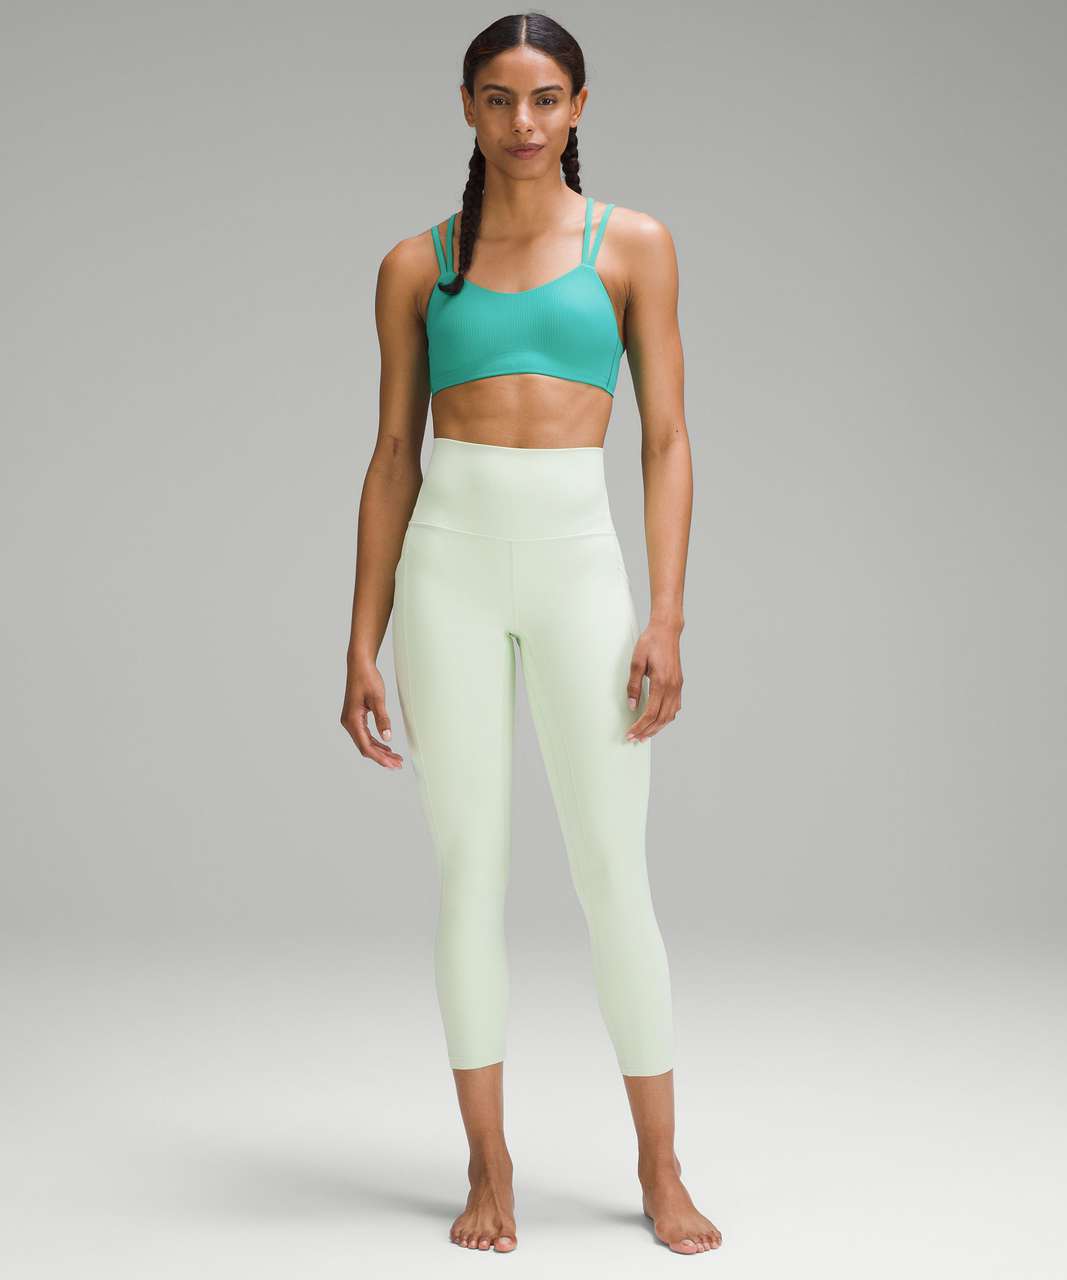 Lululemon Like a Cloud Ribbed Bra *Light Support, B/C Cup - Kelly Green